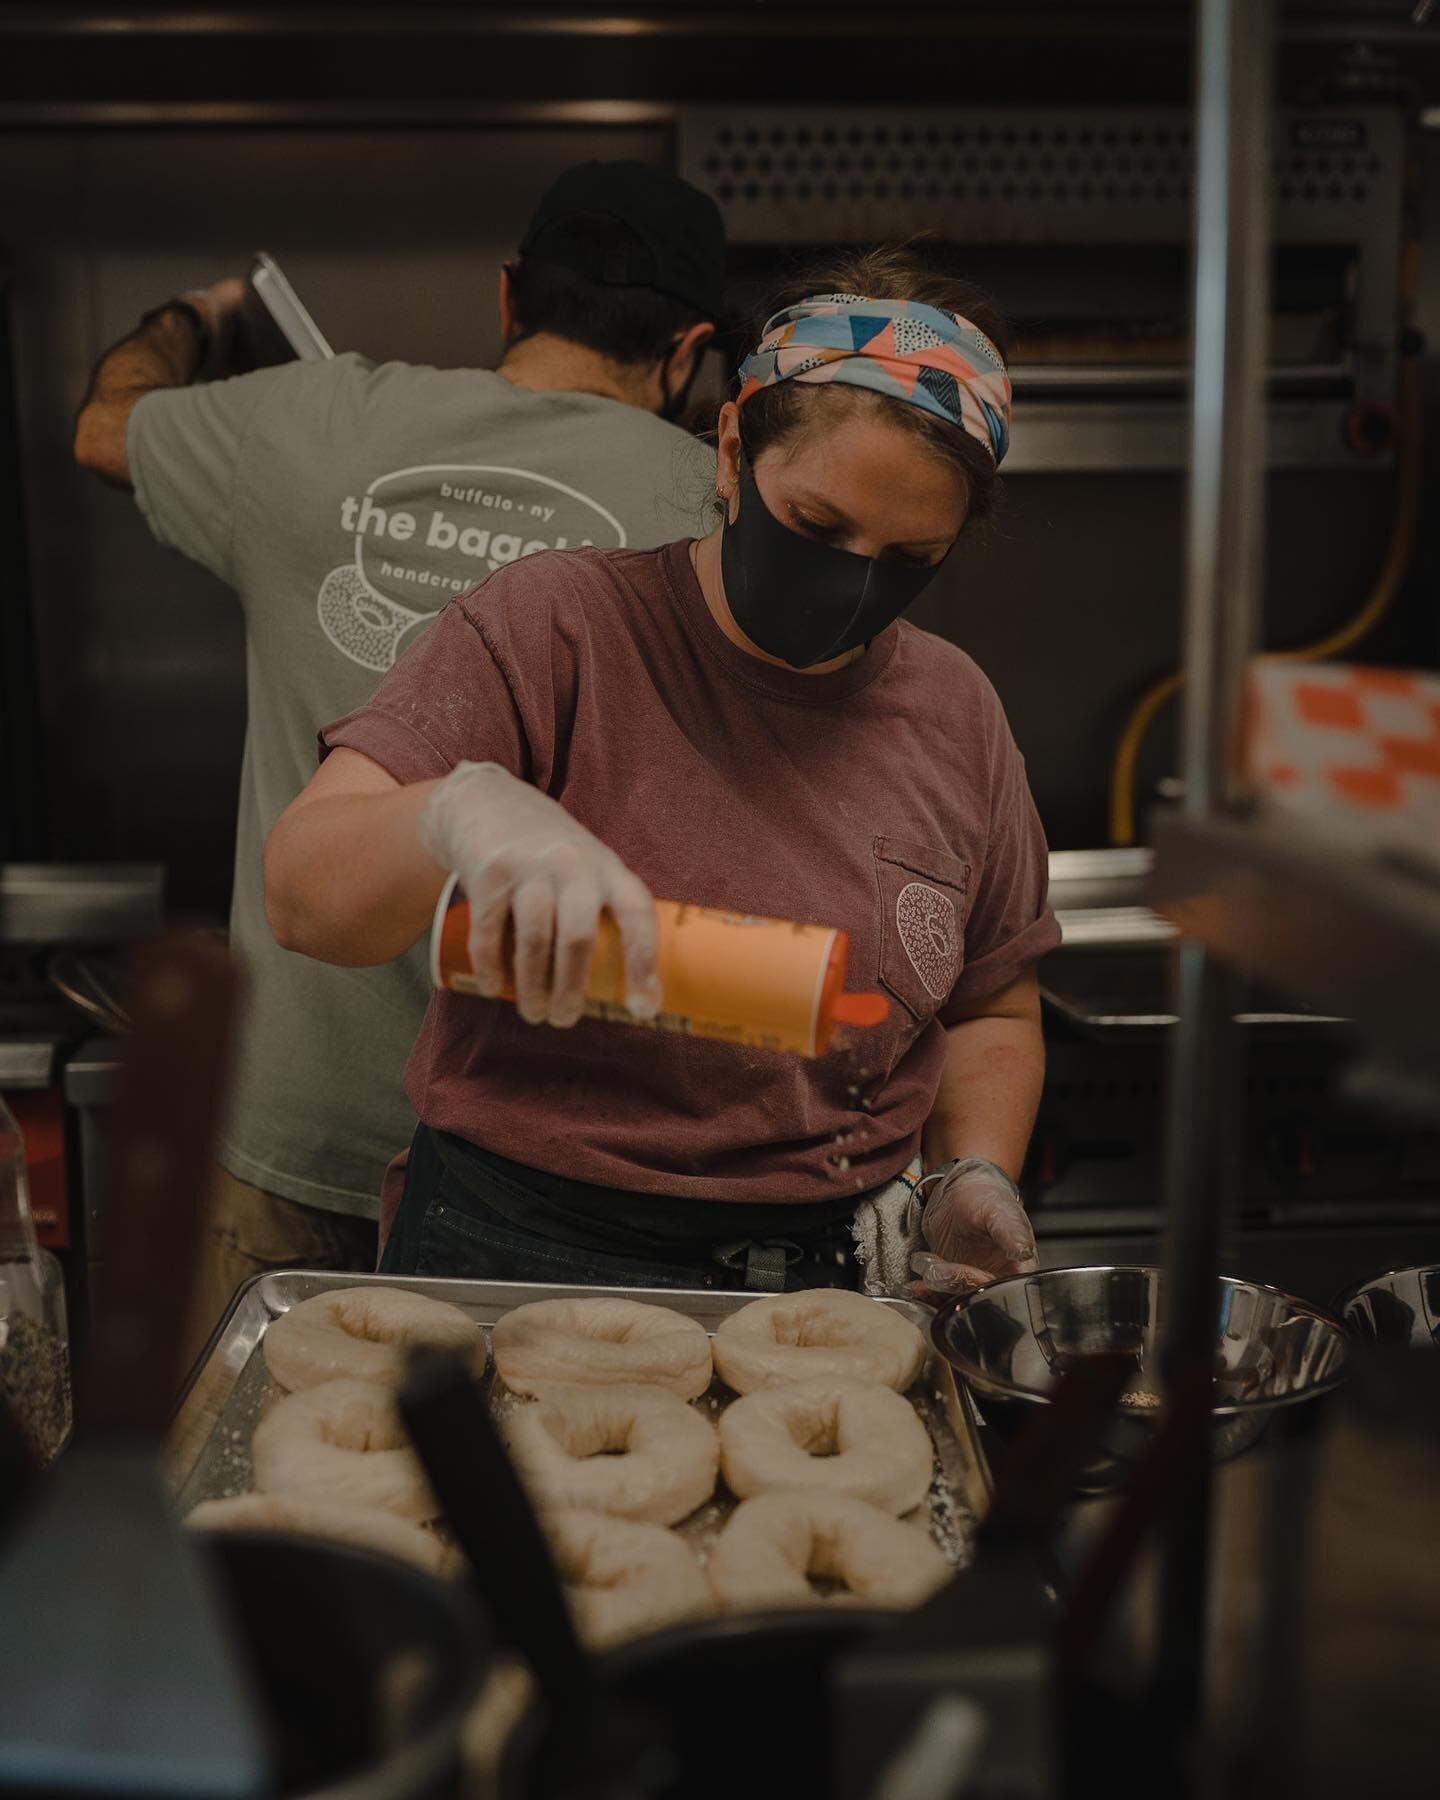 Morgan is a full-time teacher and John is a full-time architect. they make bagels every single night. depending on the next day&rsquo;s quantity demands, they sometimes aren&rsquo;t just there during the night but *through the night. talk about a pow